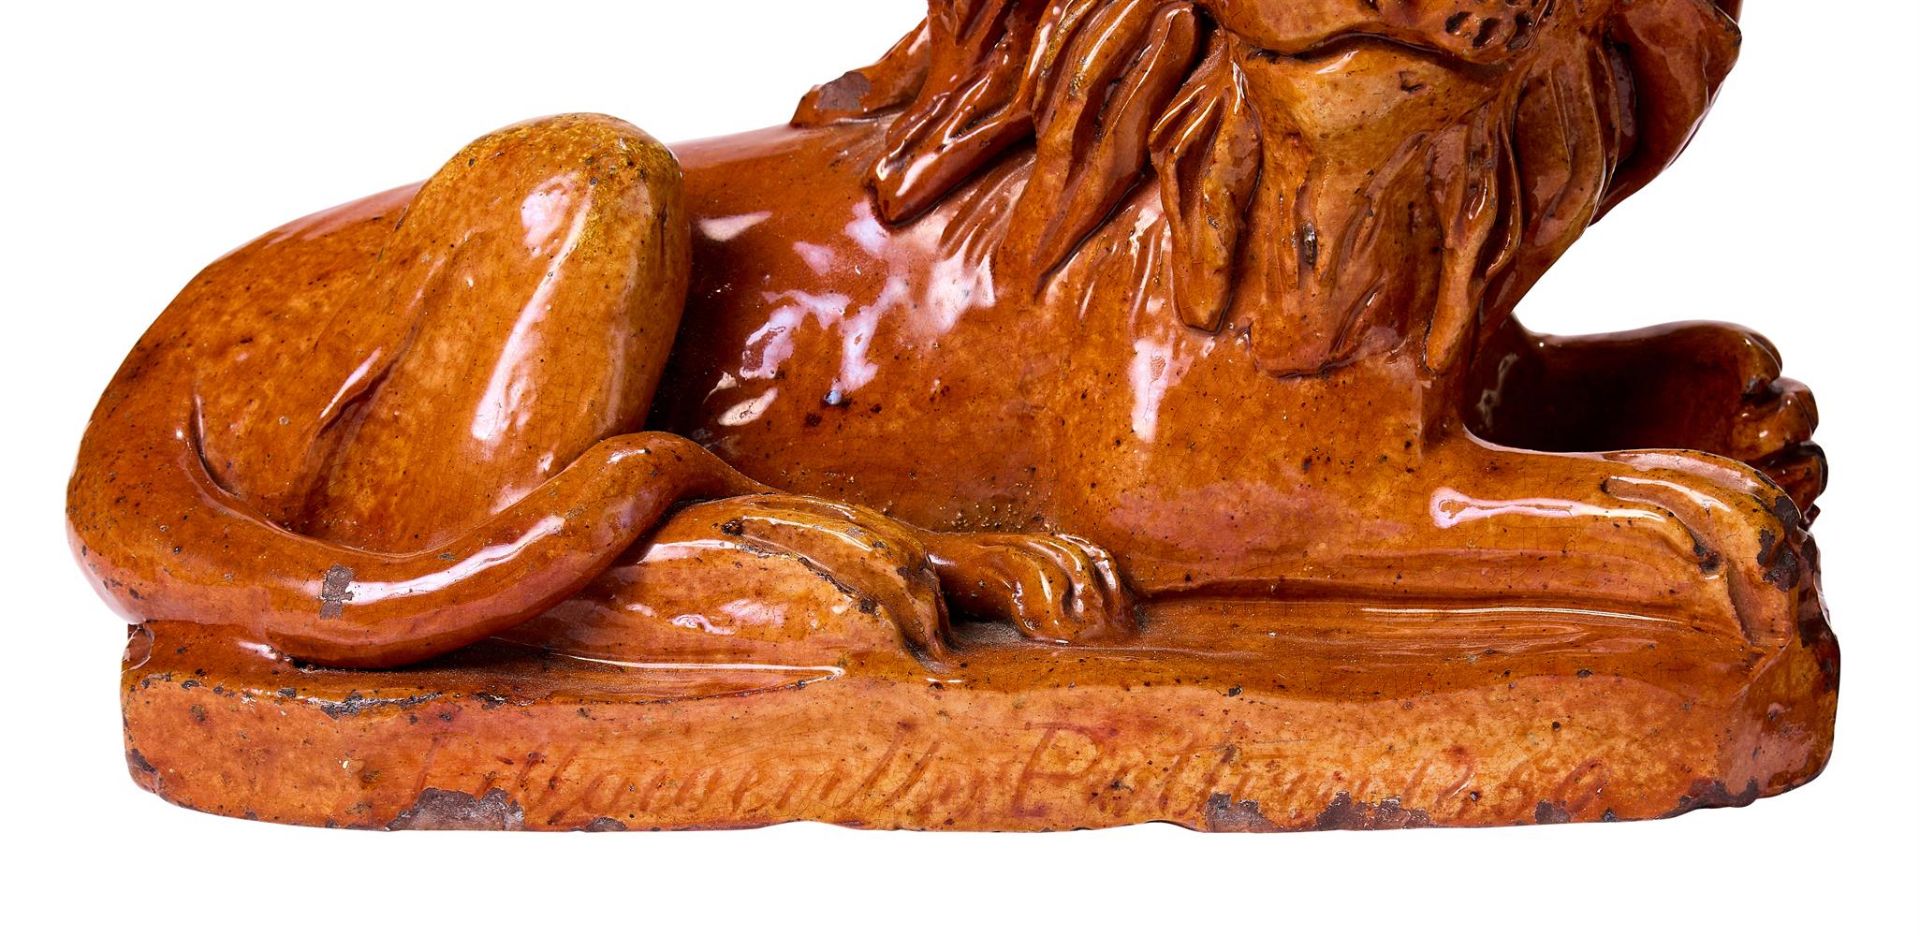 A MATCHED PAIR OF PILL POTTERY (NEWPORT MONMOUTHSHIRE) TREACLE-GLAZED RED POTTERY RECUMBENT LIONS - Image 3 of 3